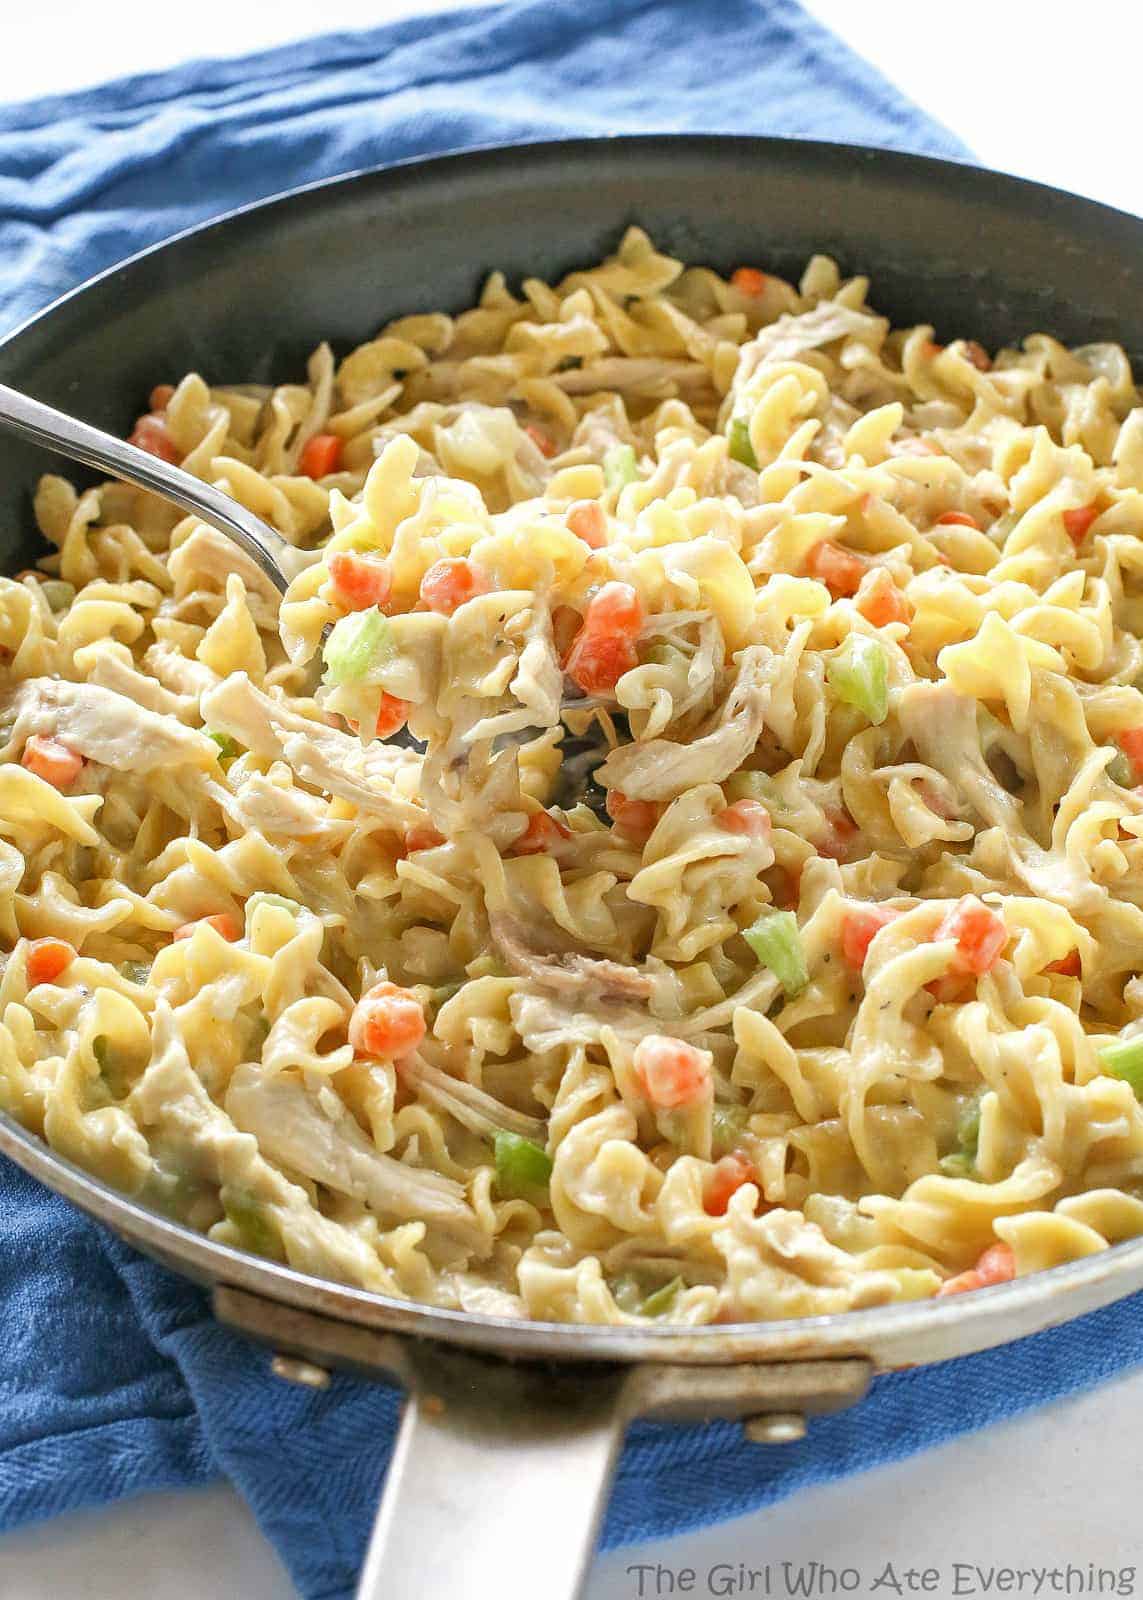 https://www.the-girl-who-ate-everything.com/wp-content/uploads/2016/02/31-Chicken-Noodle-Skillet.jpg